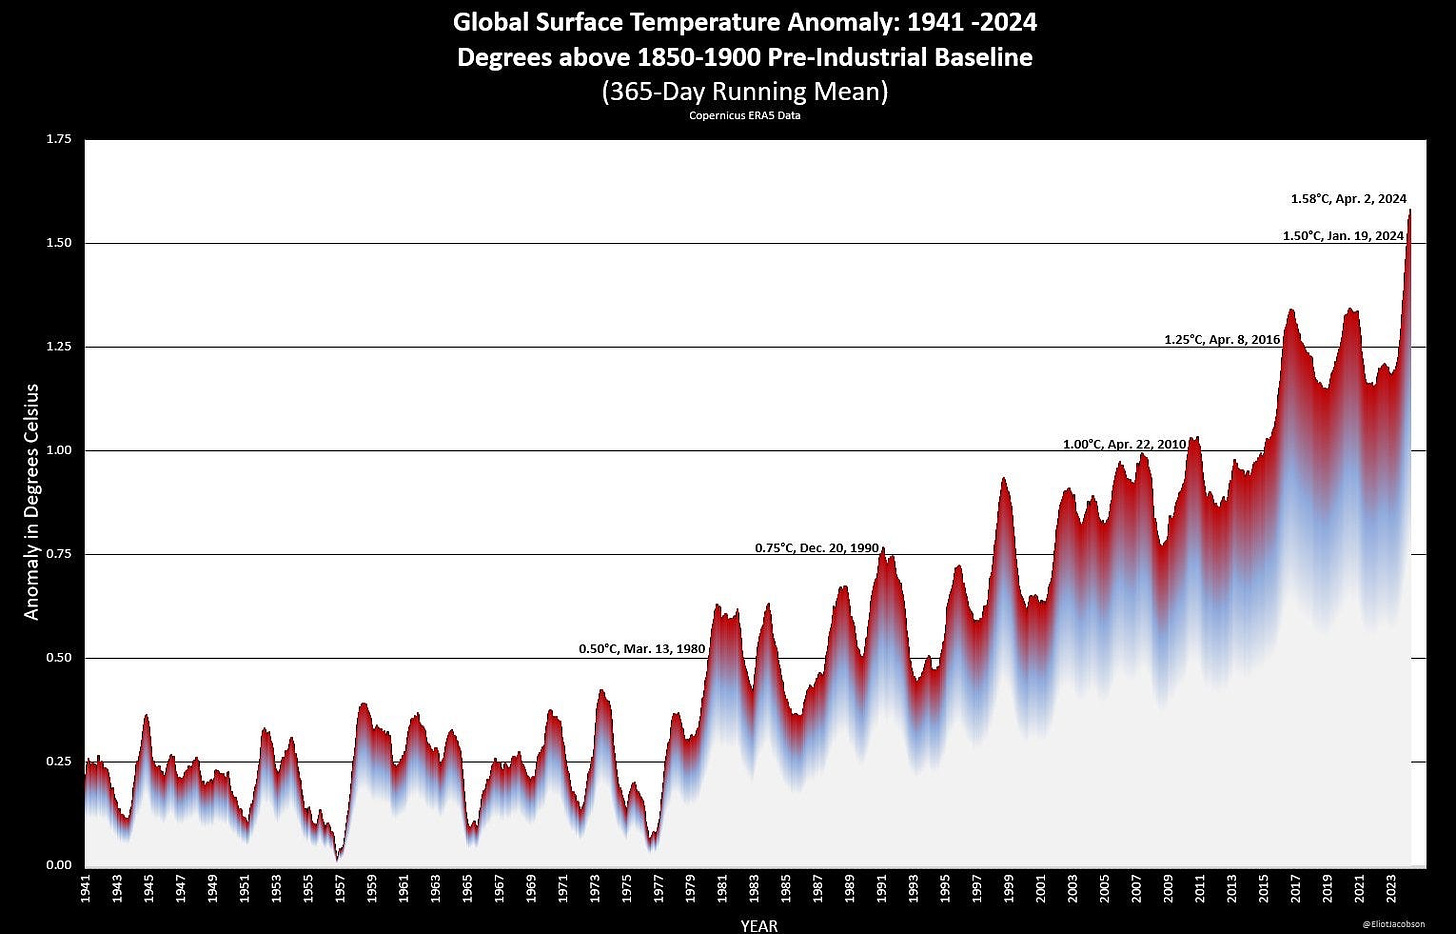 Global surface temperature anomaly since the 1940s: the graph is more or less horizontal until the mid-1970s and has since gone up, with a noticeable even steeper rise at the very end.